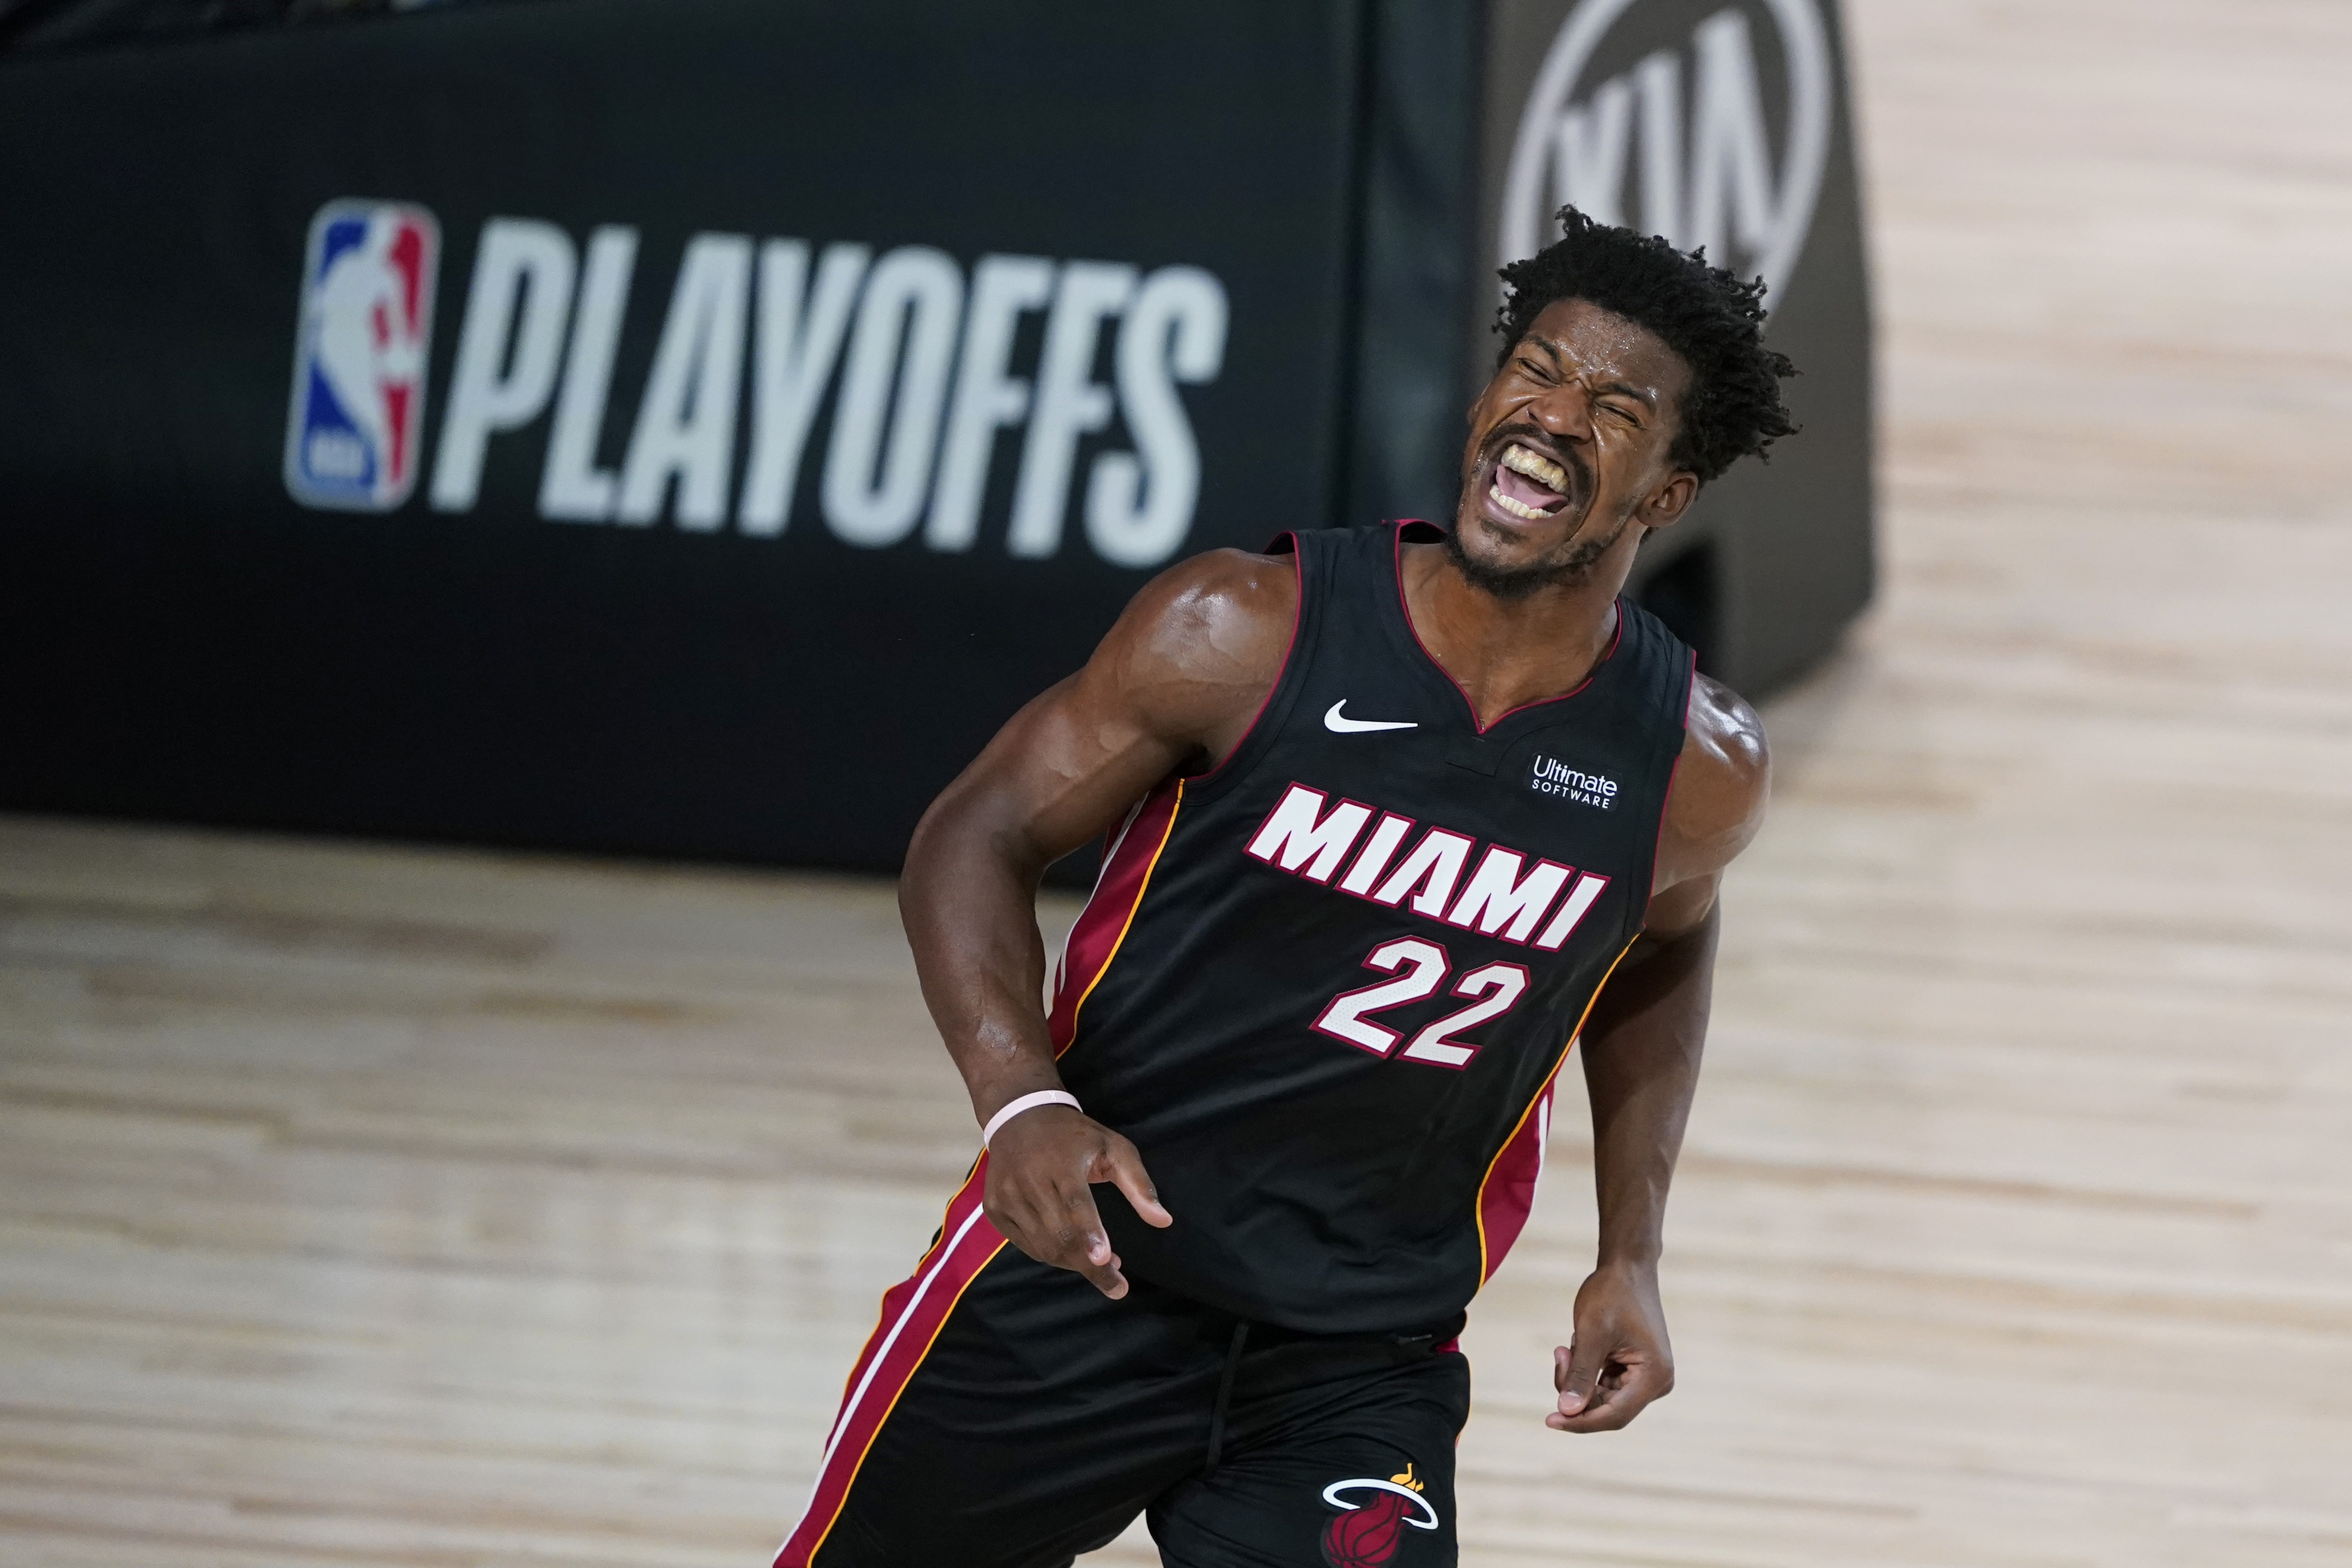 Jimmy Butler celebrates after making a good play